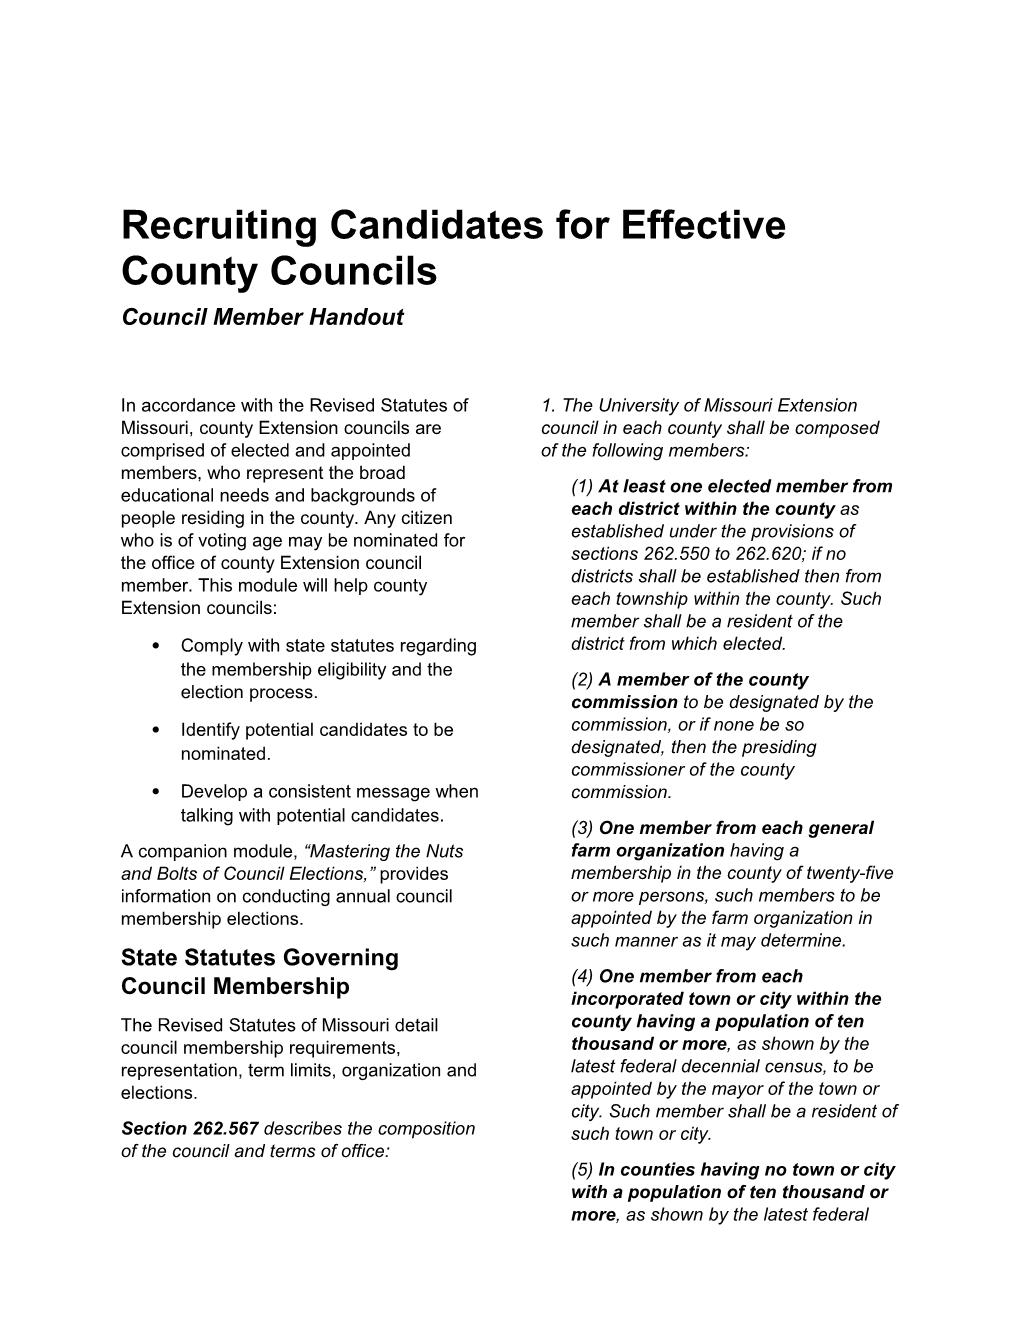 Recruiting Candidates for Effective County Councils